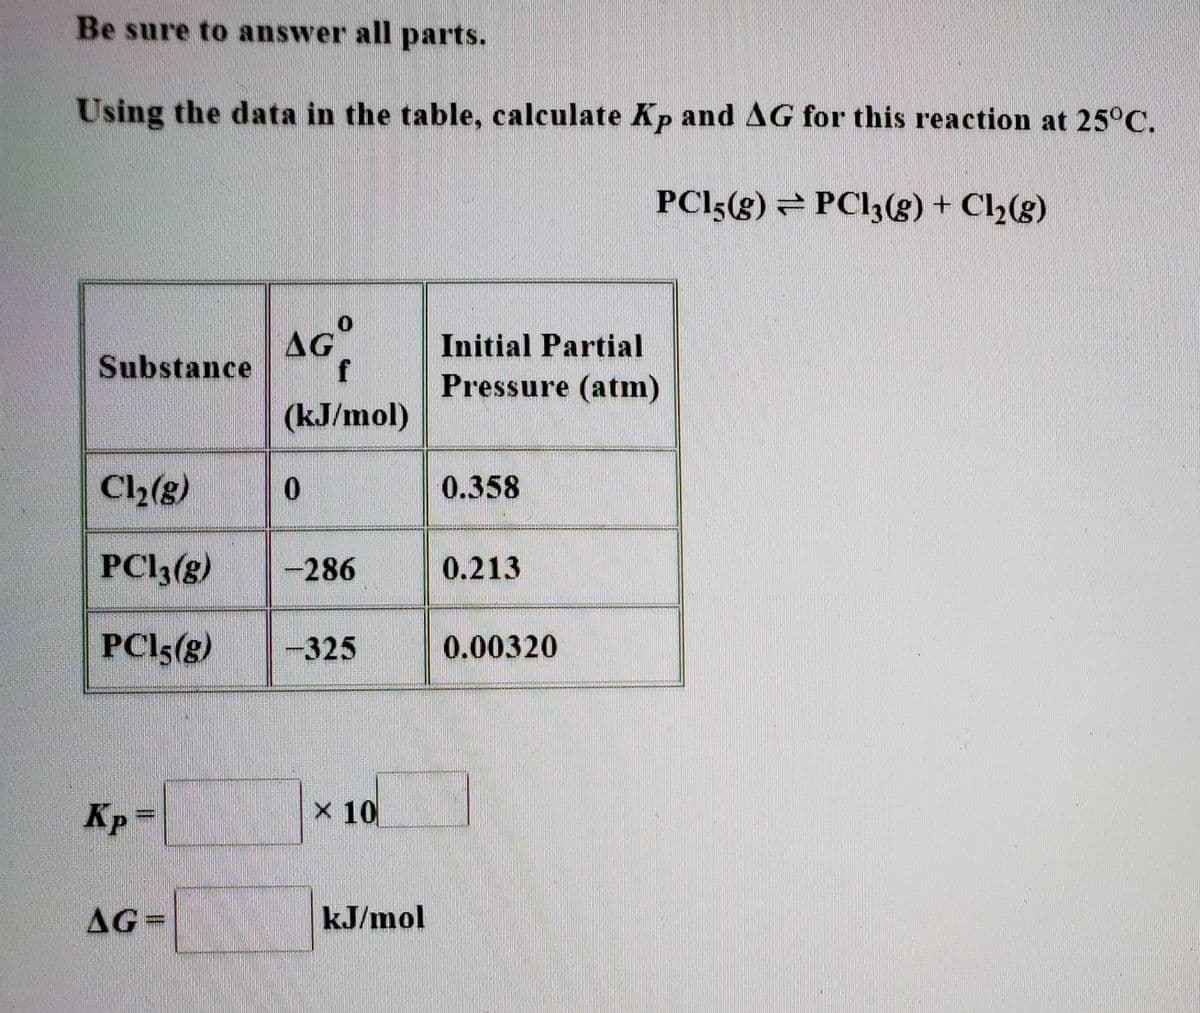 Be sure to answer all parts.
Using the data in the table, calculate Kp and AG for this reaction at 25°C.
PC15(g) = PC13(g) + Cl2(g)
AG"
f
Initial Partial
Substance
Pressure (atm)
(kJ/mol)
Cl2(s)
0.358
PCI3(g)
-286
0.213
PCI5(g)
-325
0.00320
Кр-
X 10
AG=
kJ/mol
